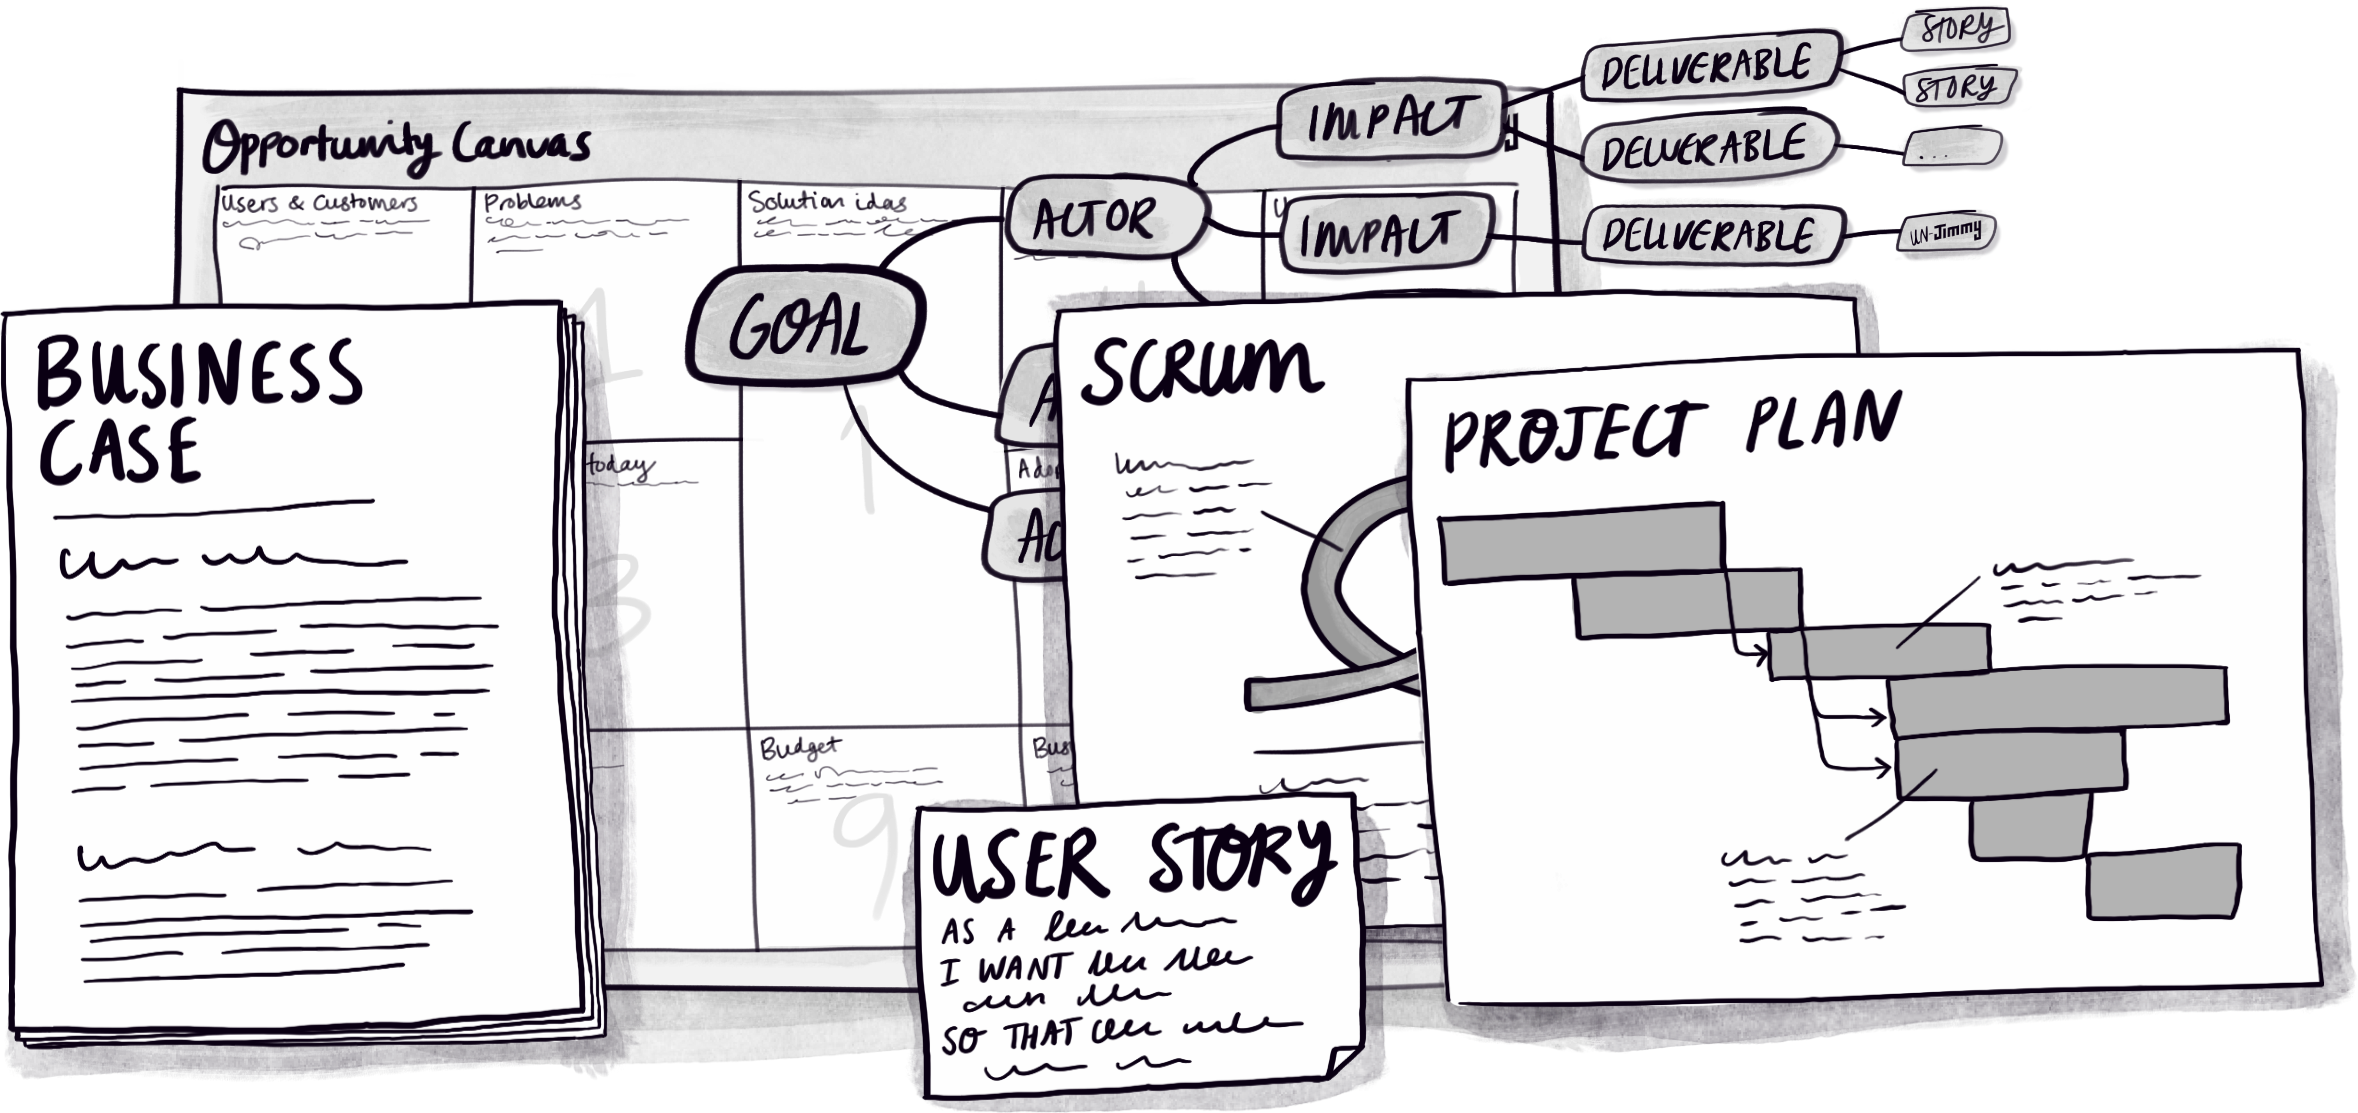 A stack of different project delivery related artefacts including a ghantt chart, scrum summary, business case, opportunity canvas, impact map, and user story.